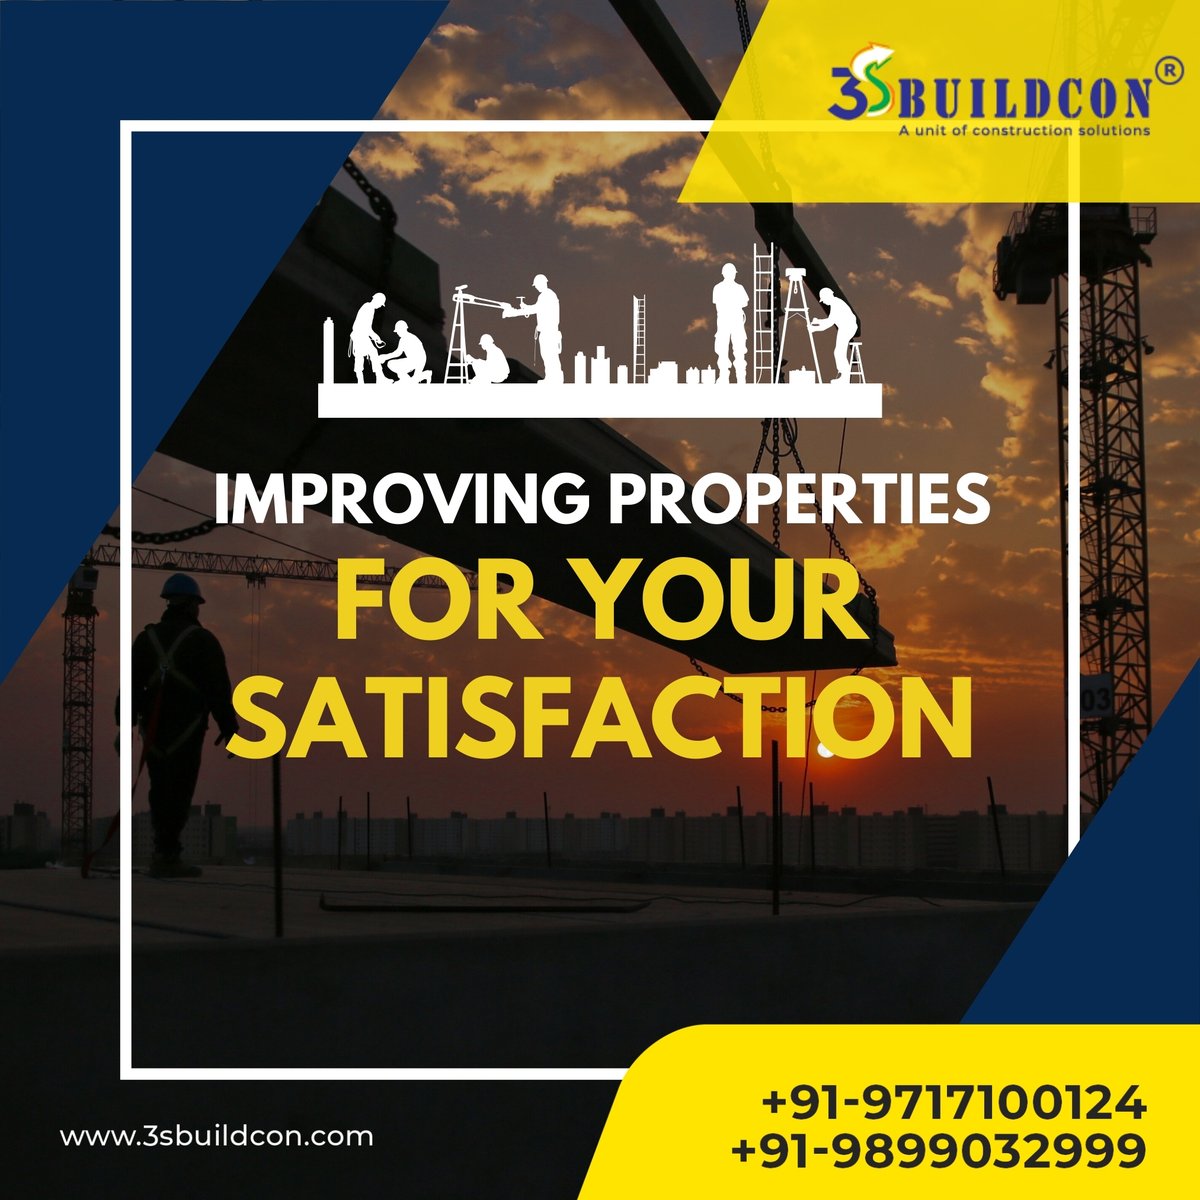 To enhance your satisfaction, we are constantly improving our services and properties. We Build your dream property.

#CustomerSatisfaction #ContinuousImprovement #EnhancedExperience #FeedbackIsKey #CustomerExperience #ServiceExcellence #qualityimprovement